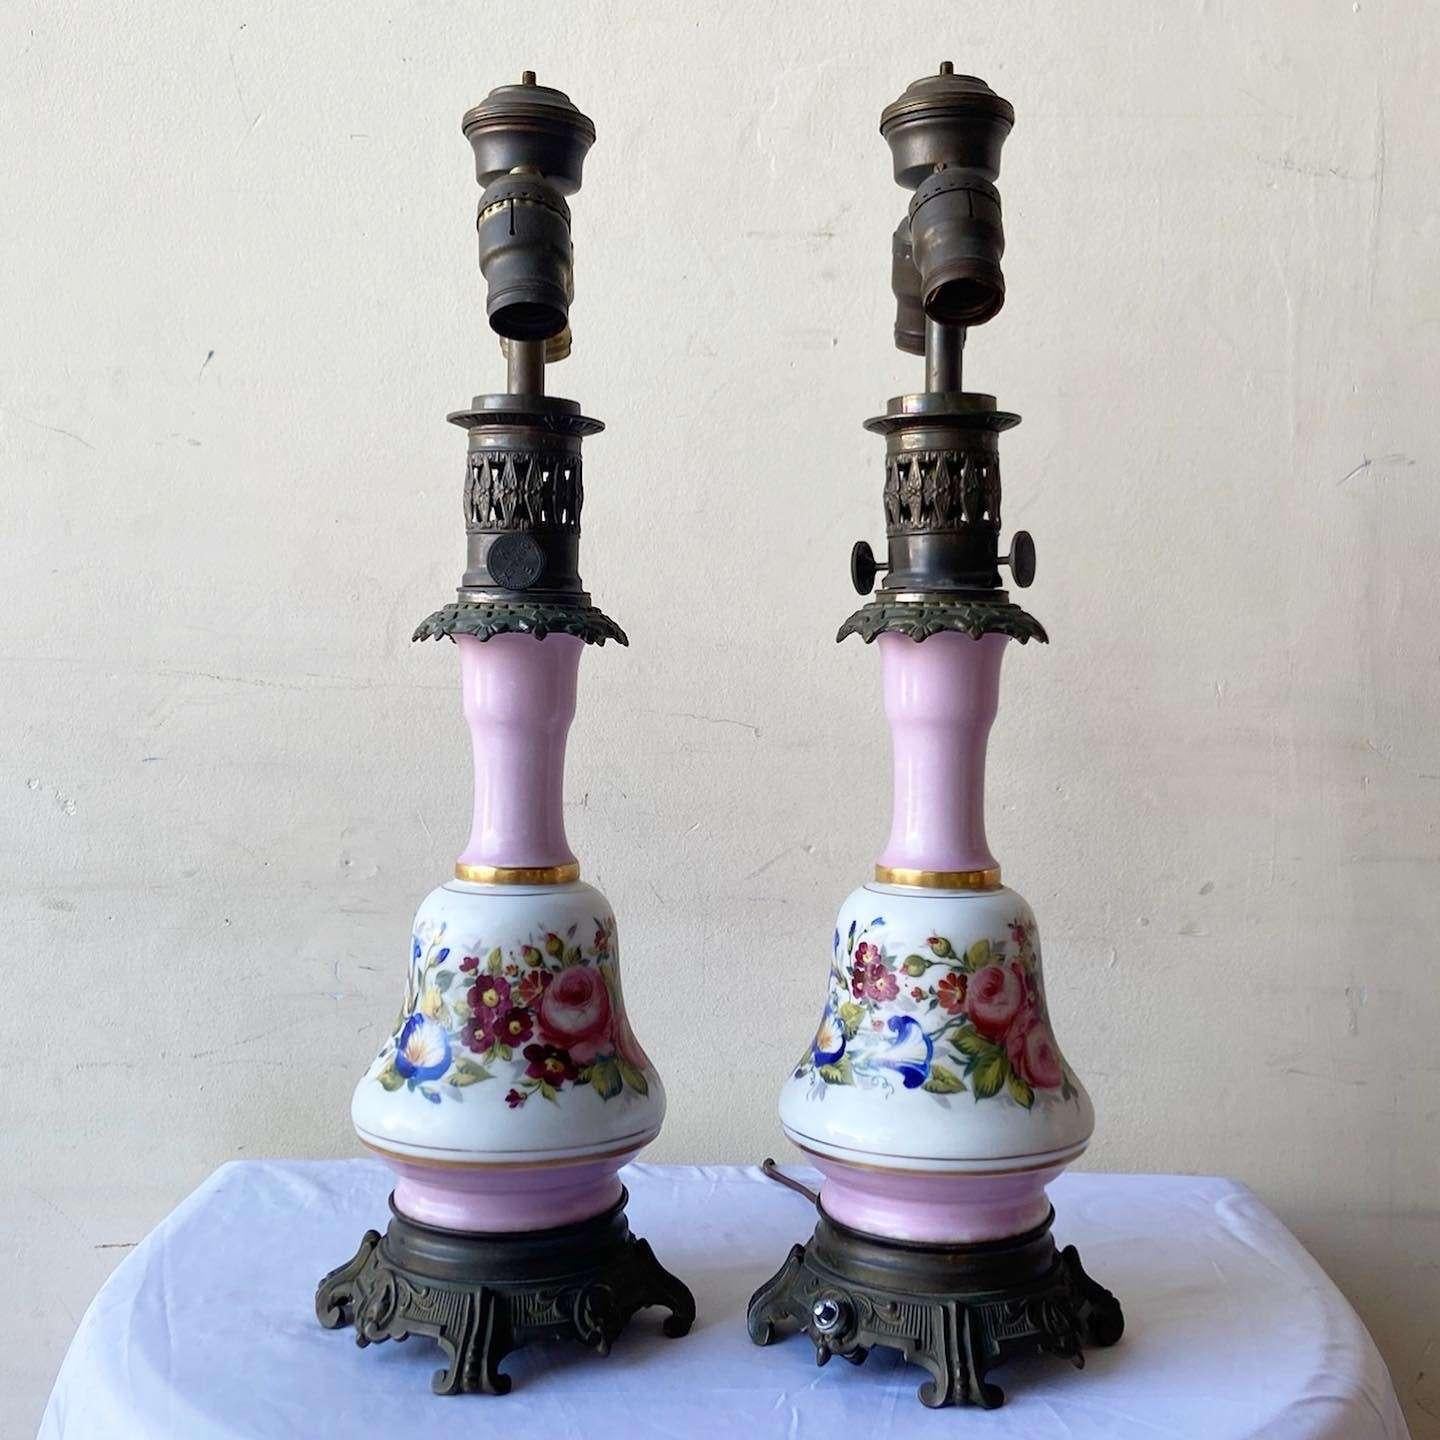 Vintage French Pink and White Porcelain and Brass Table Lamps - a Pair For Sale 1